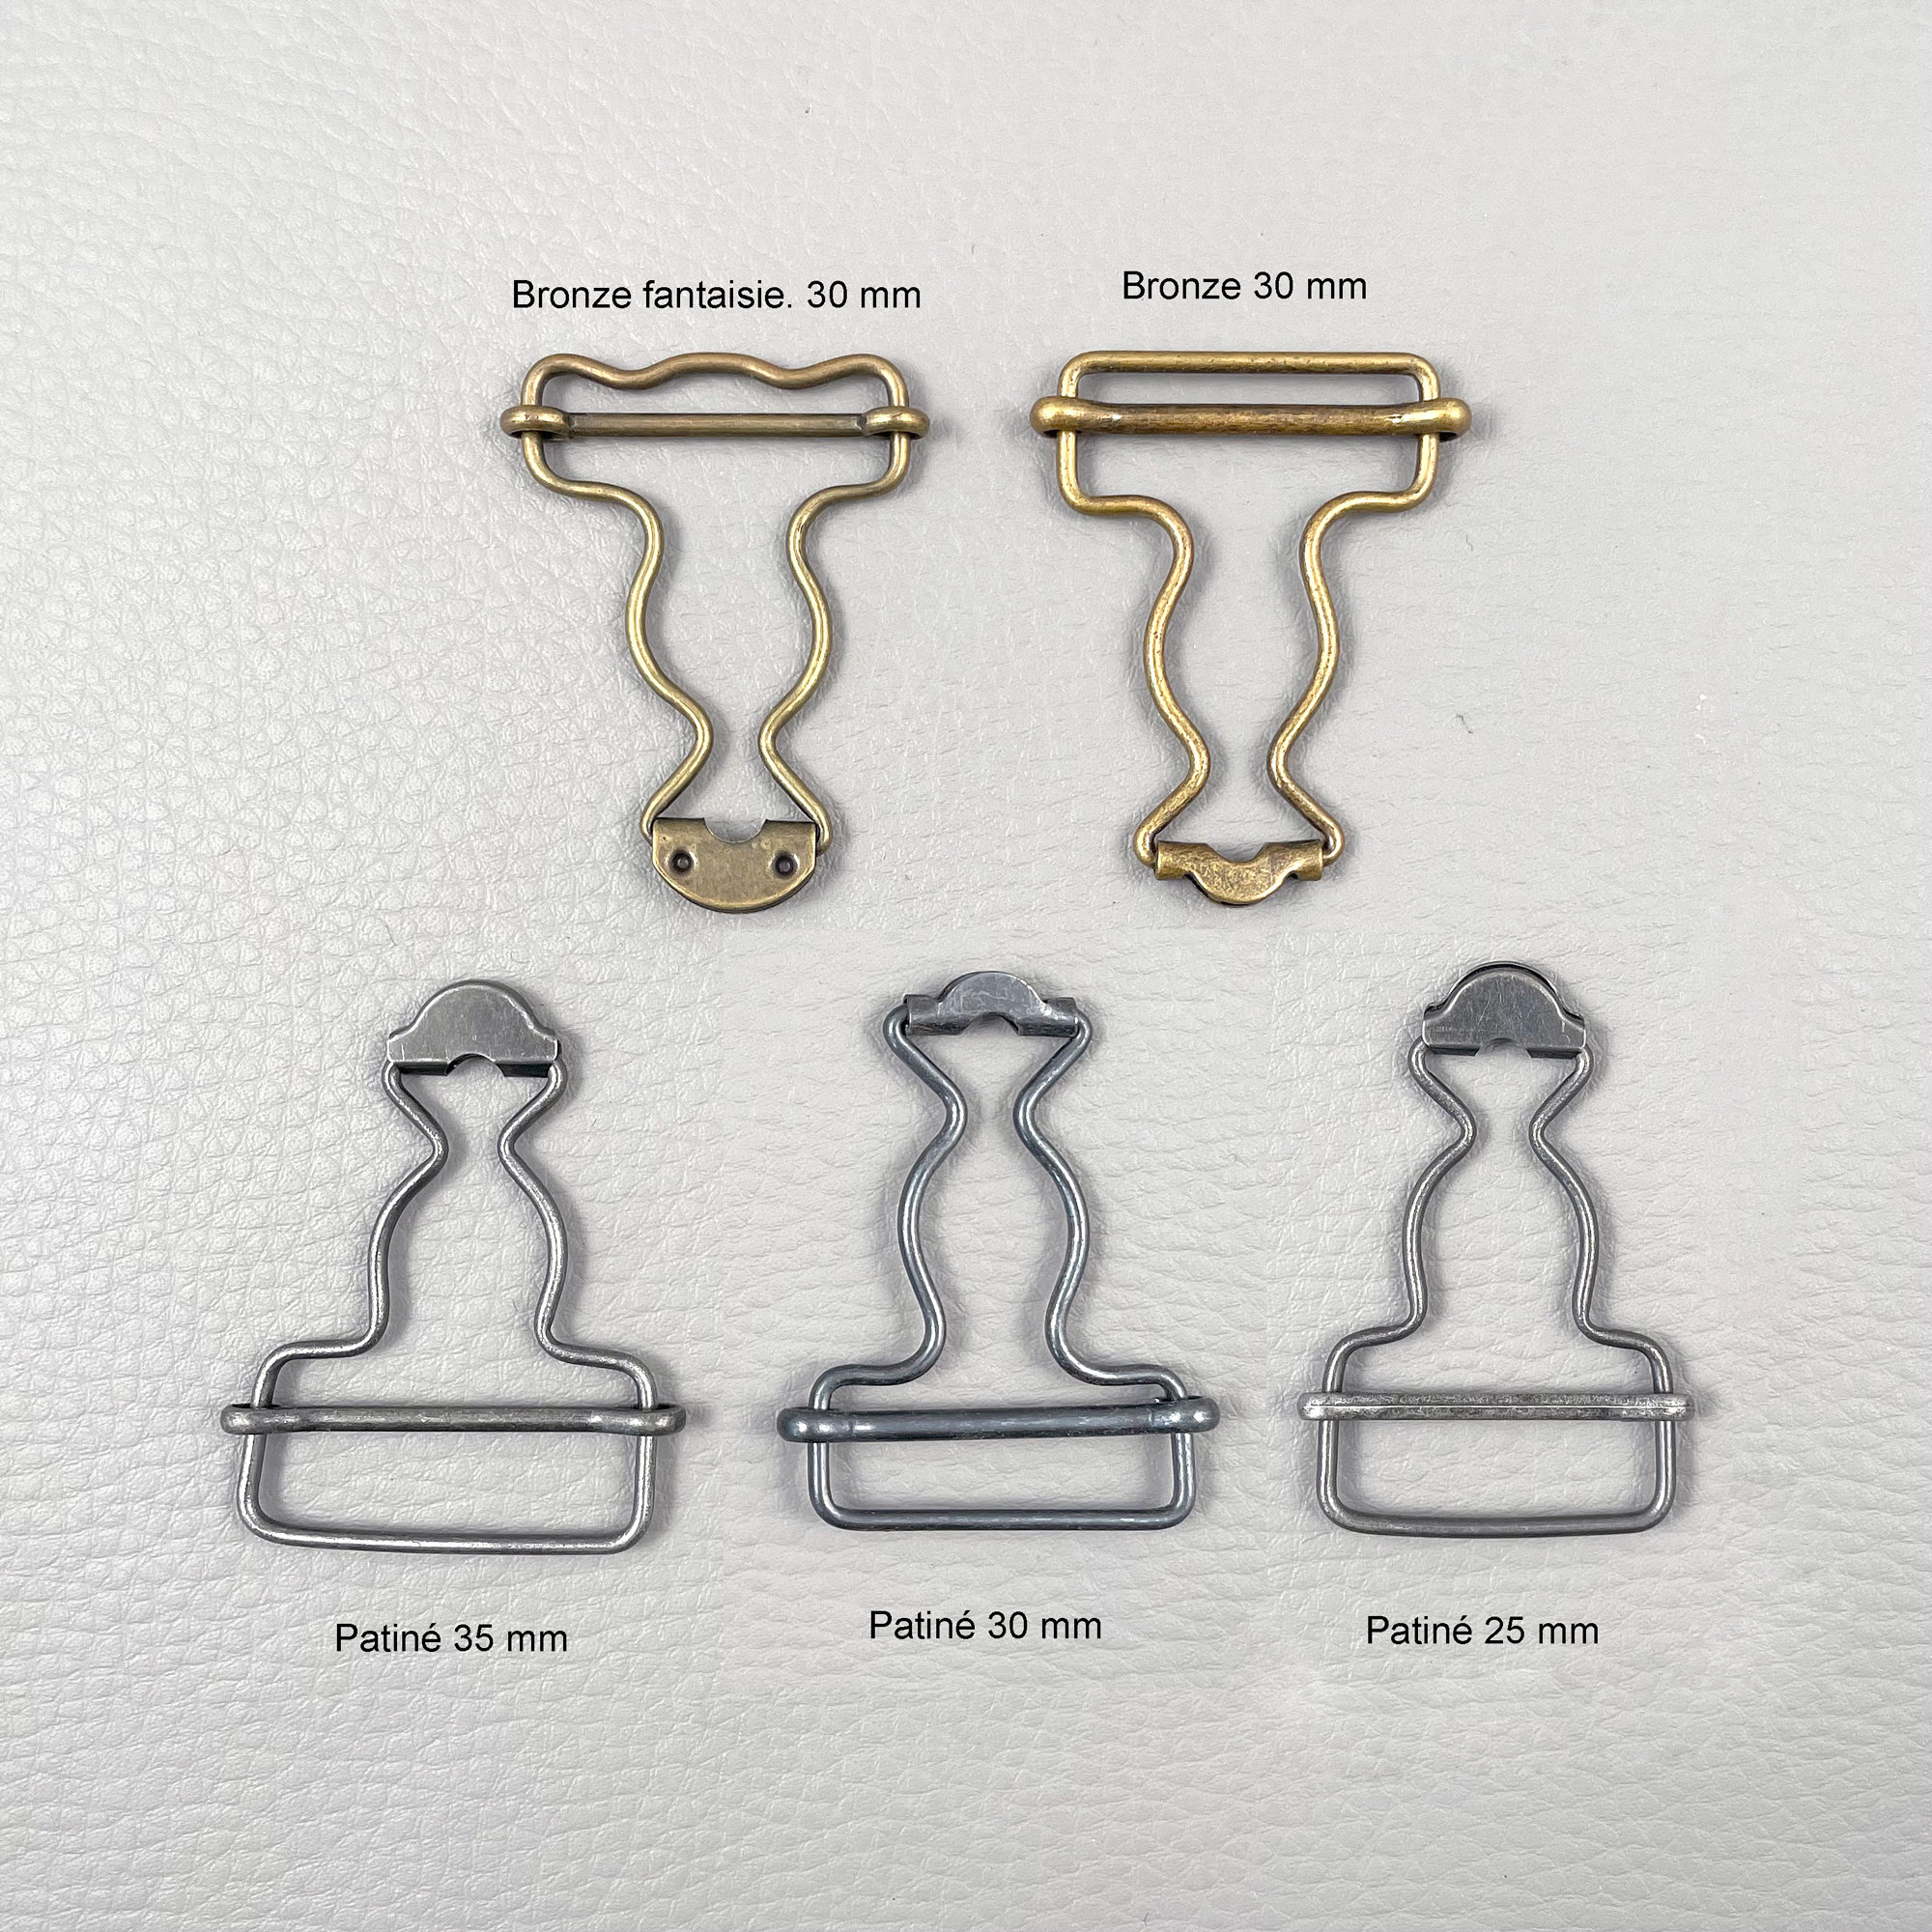 Dritz® Overall Buckles. for 1-1/4 3.1cm Straps. Nickel. 2 per Package 